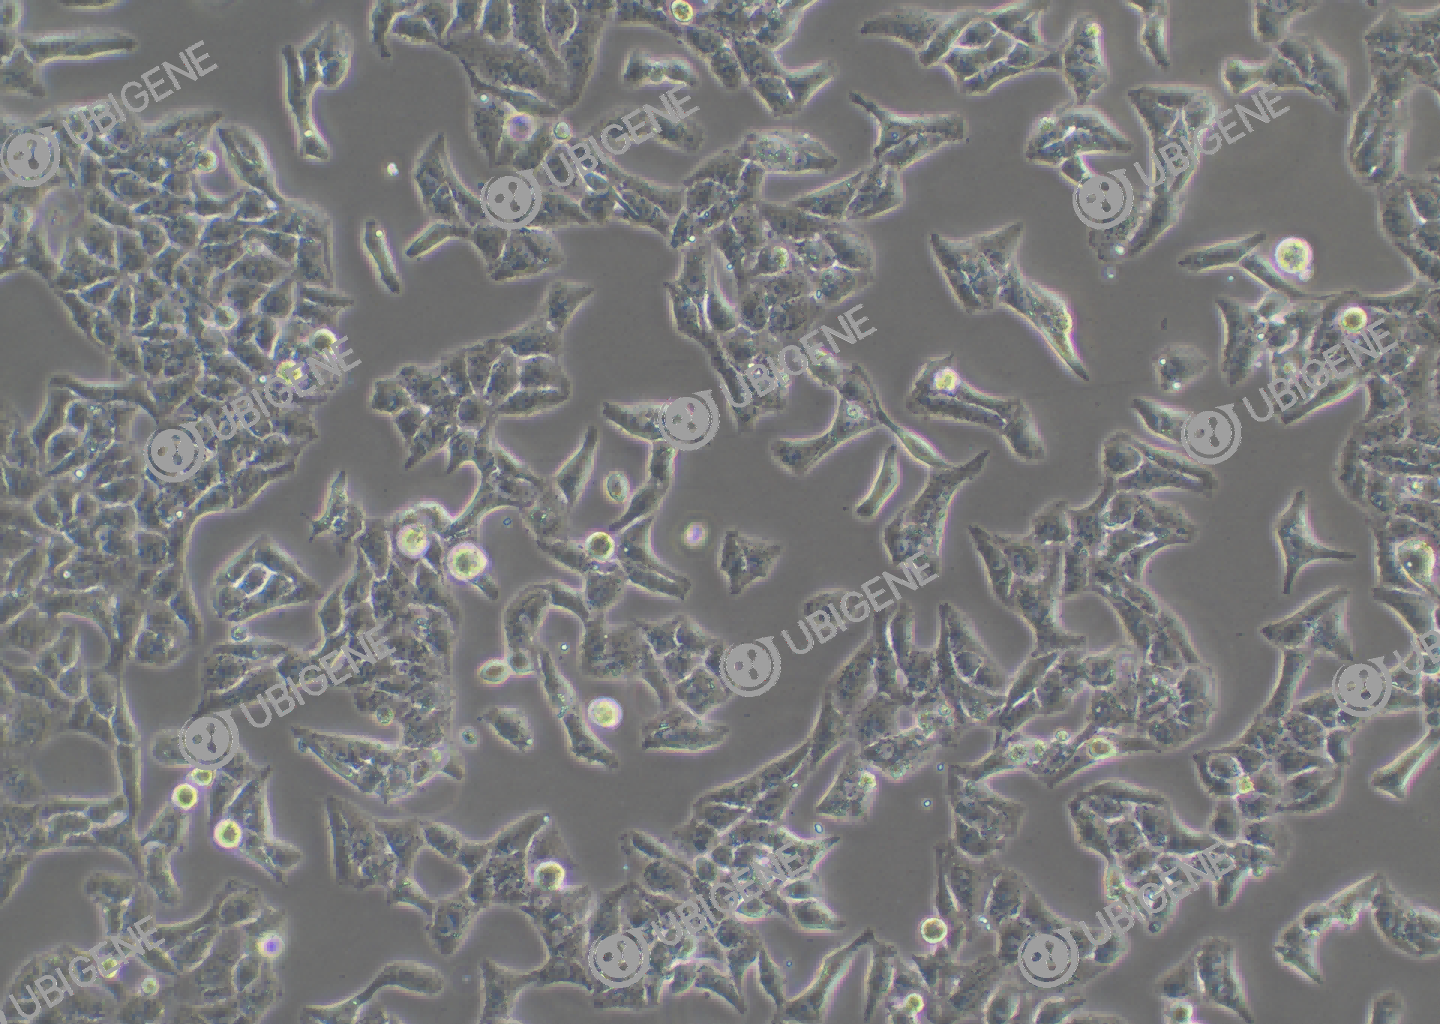 L-02 cell line Cultured cell morphology